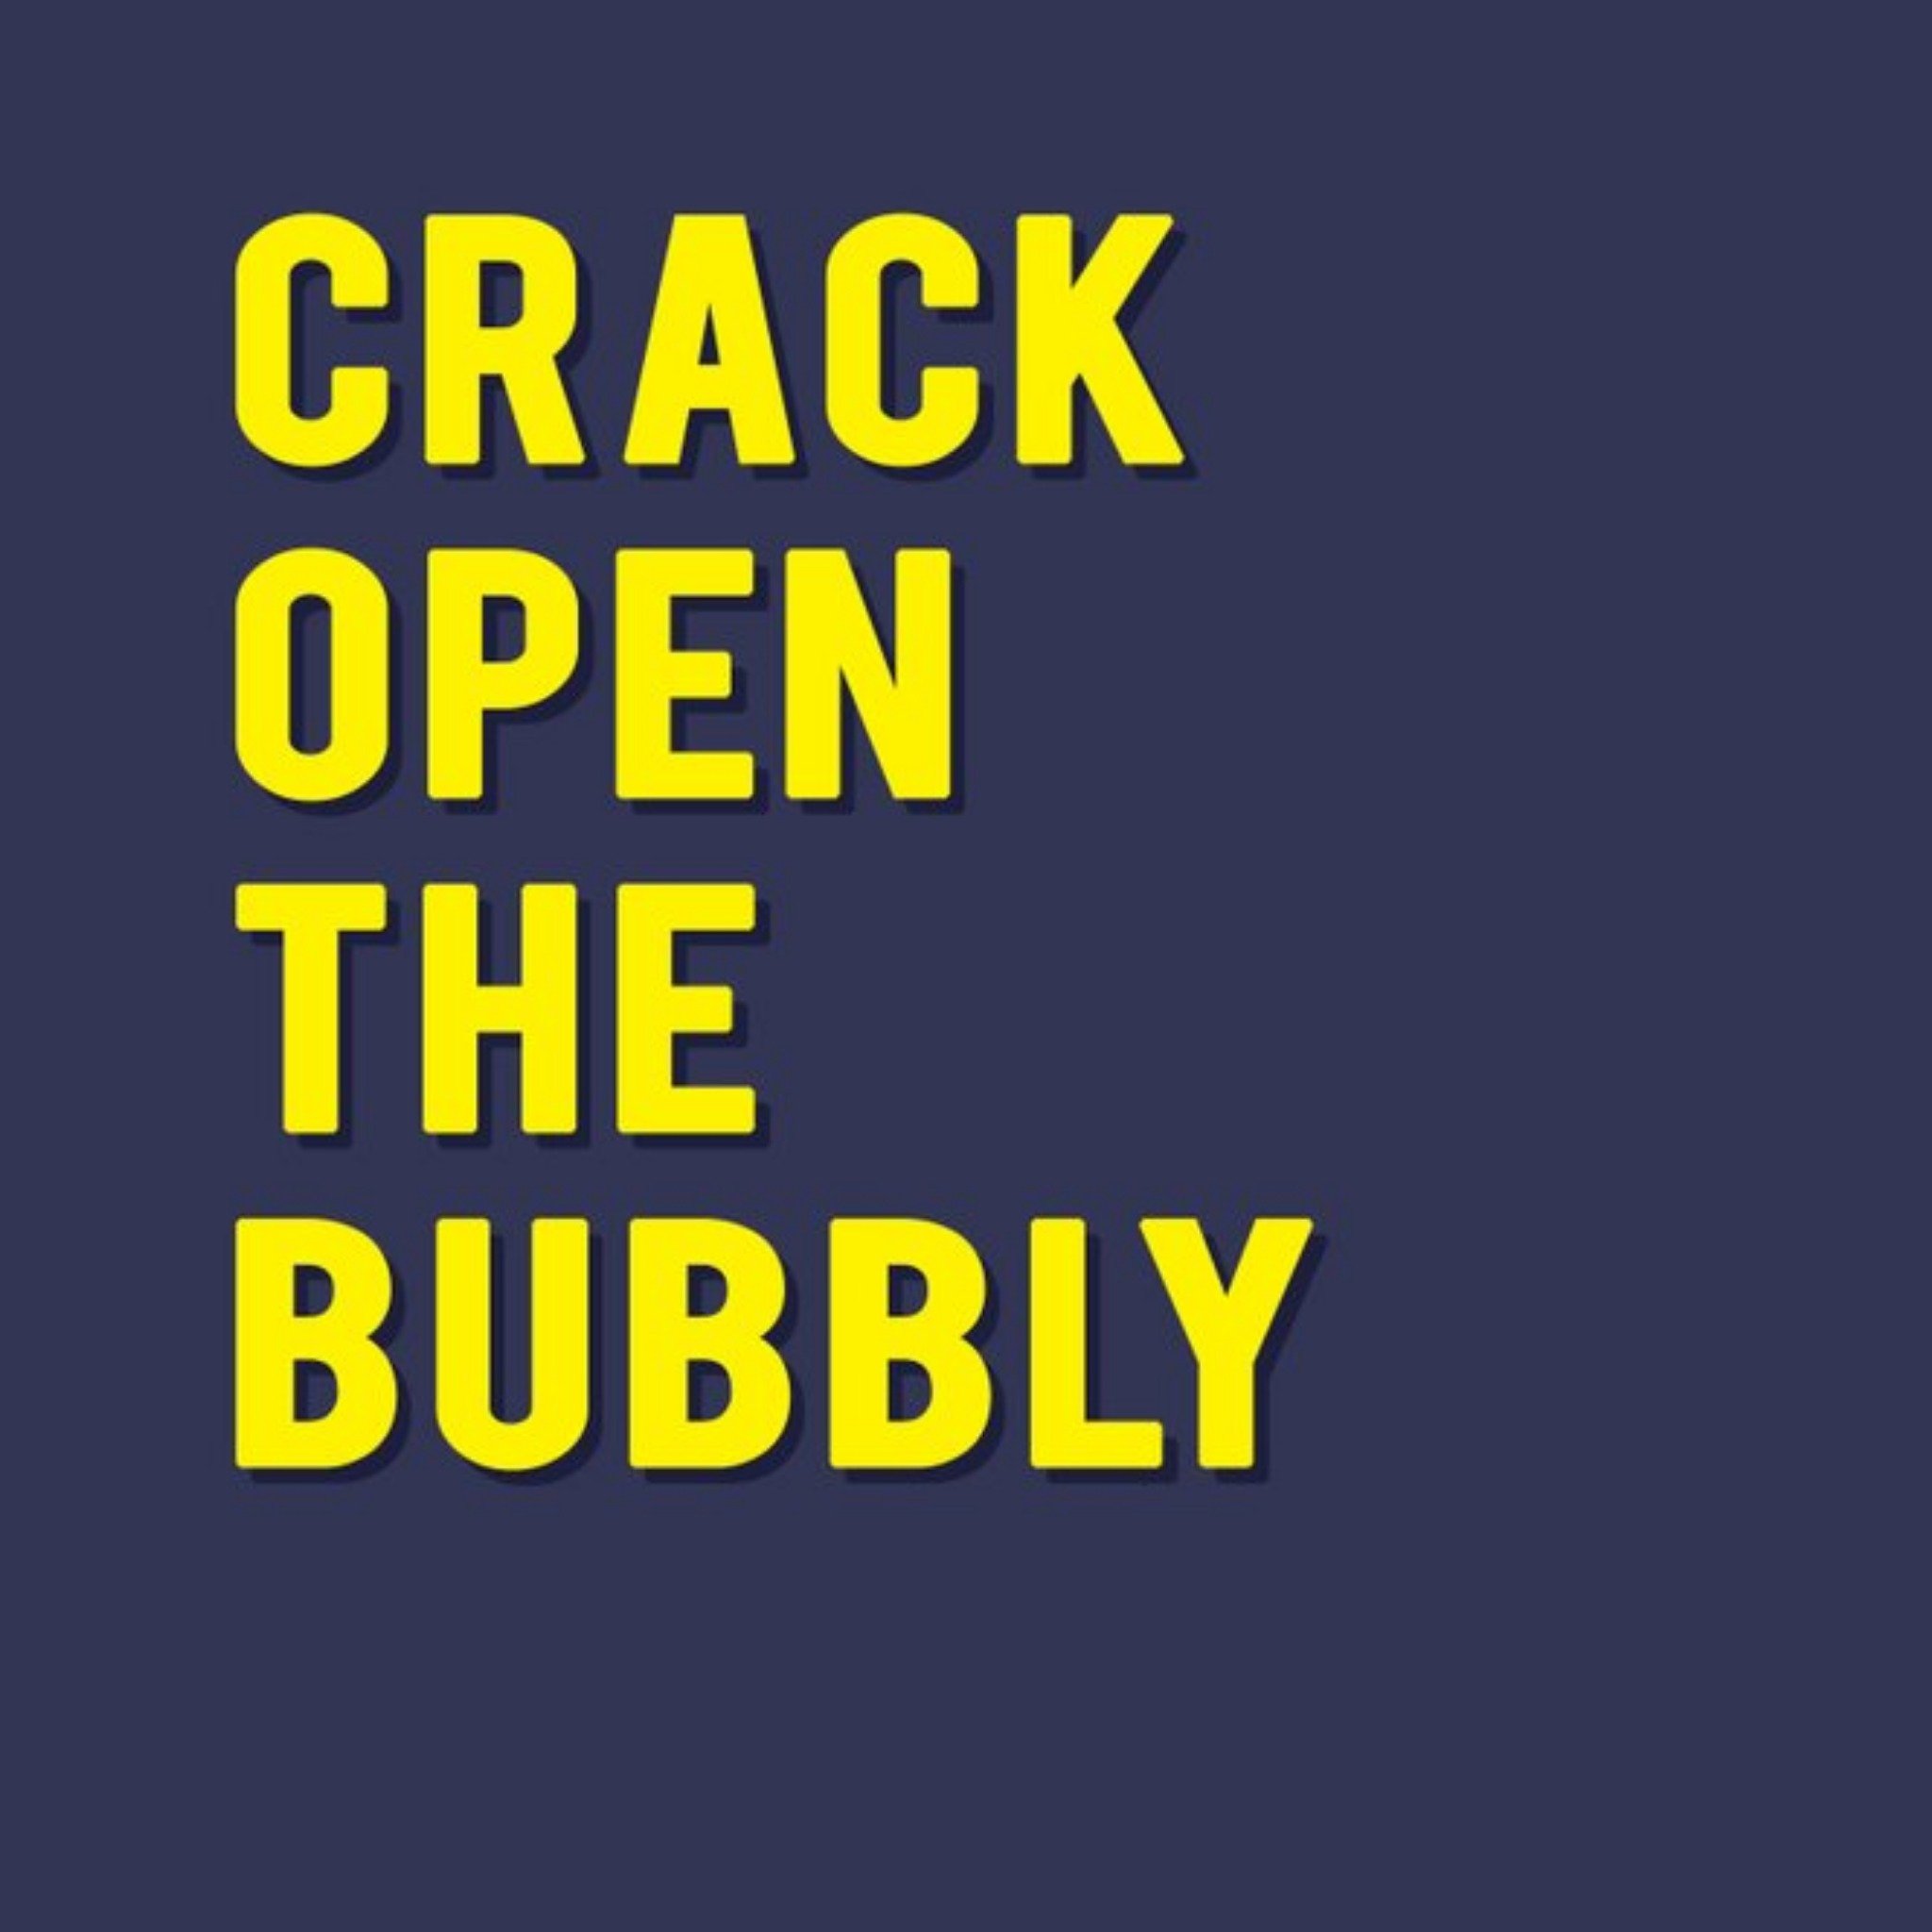 Moonpig Modern Typographical Crack Open The Bubbly Card, Square